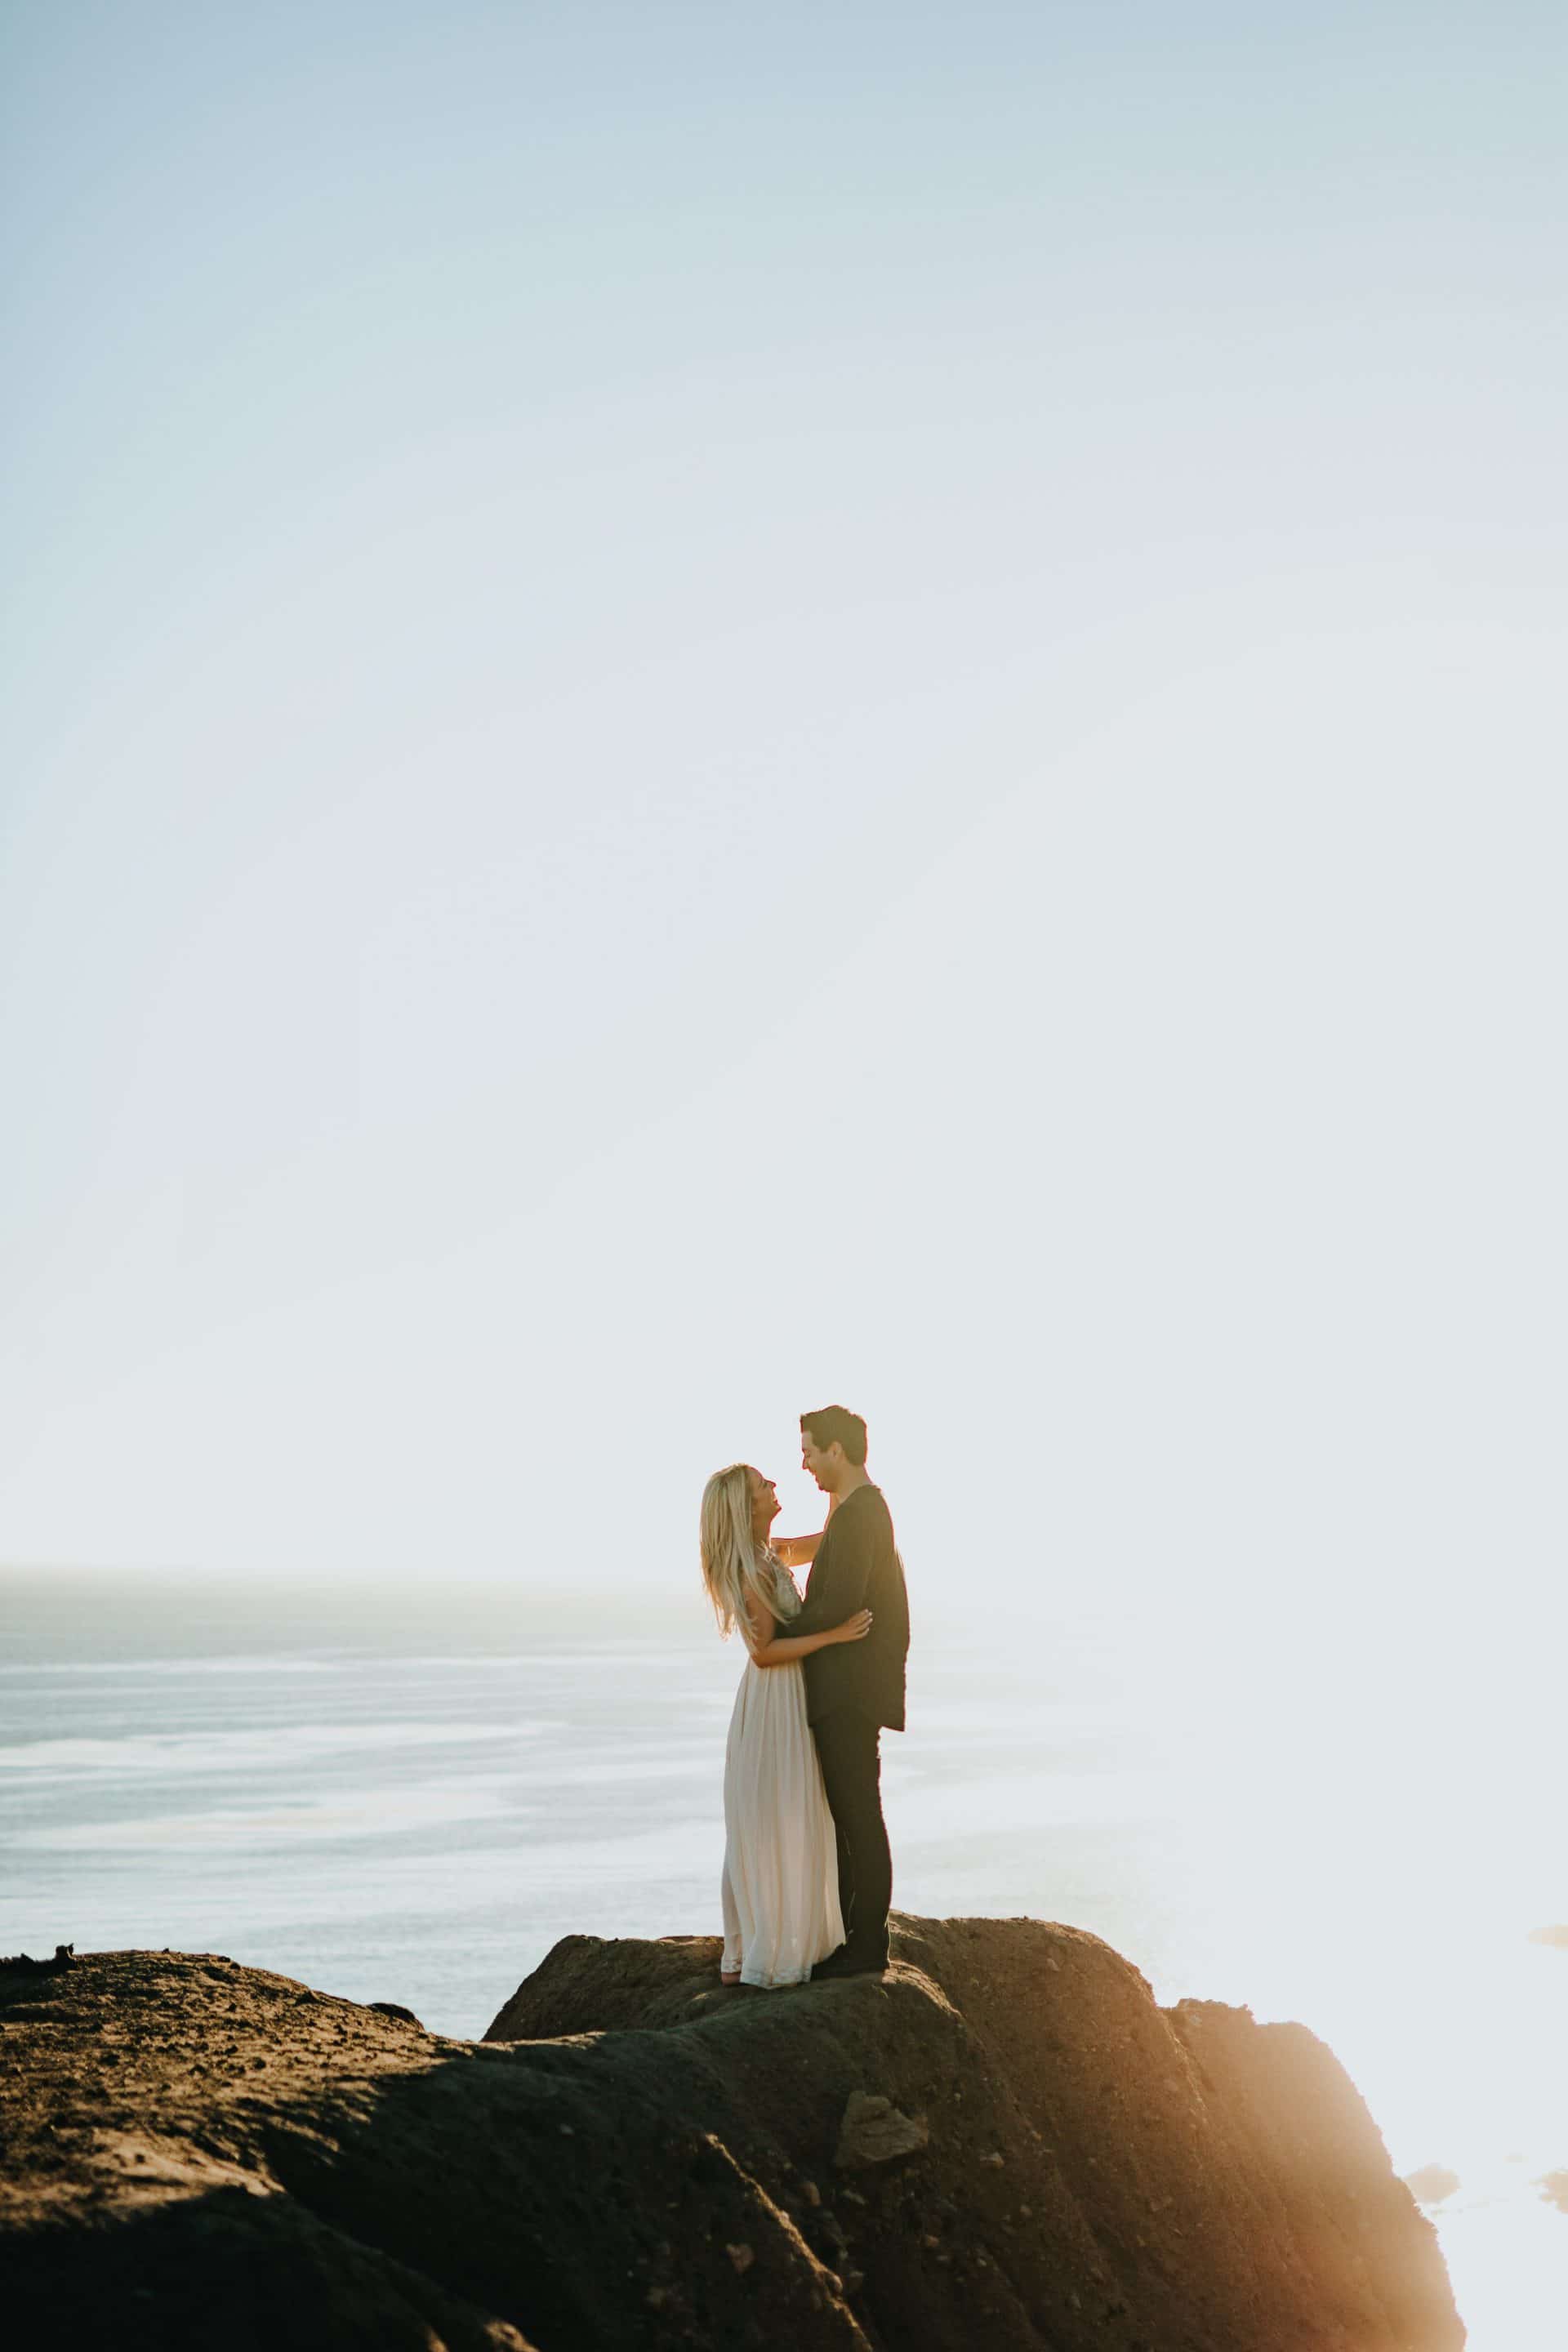 Married couple holding each other standing near the ocean